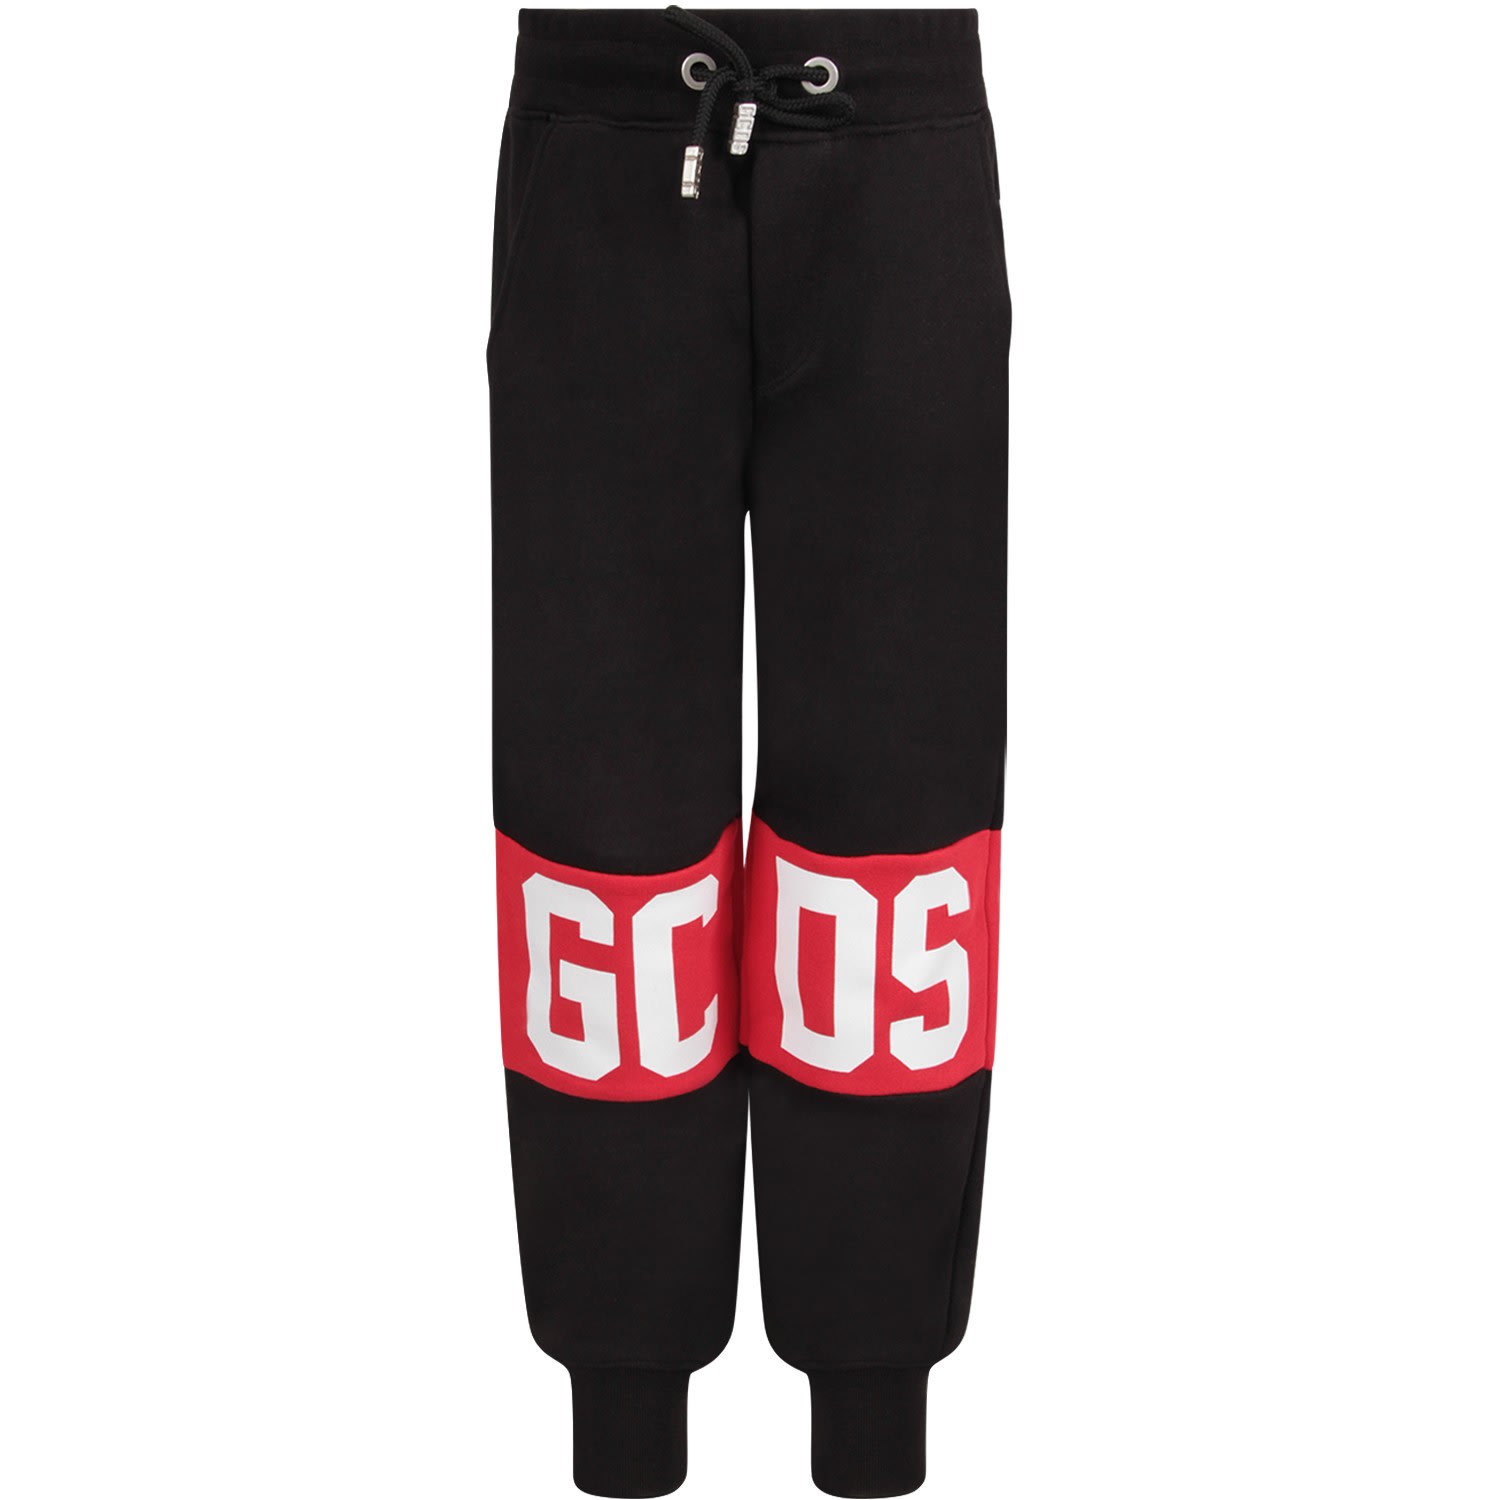 black and red sweatpants